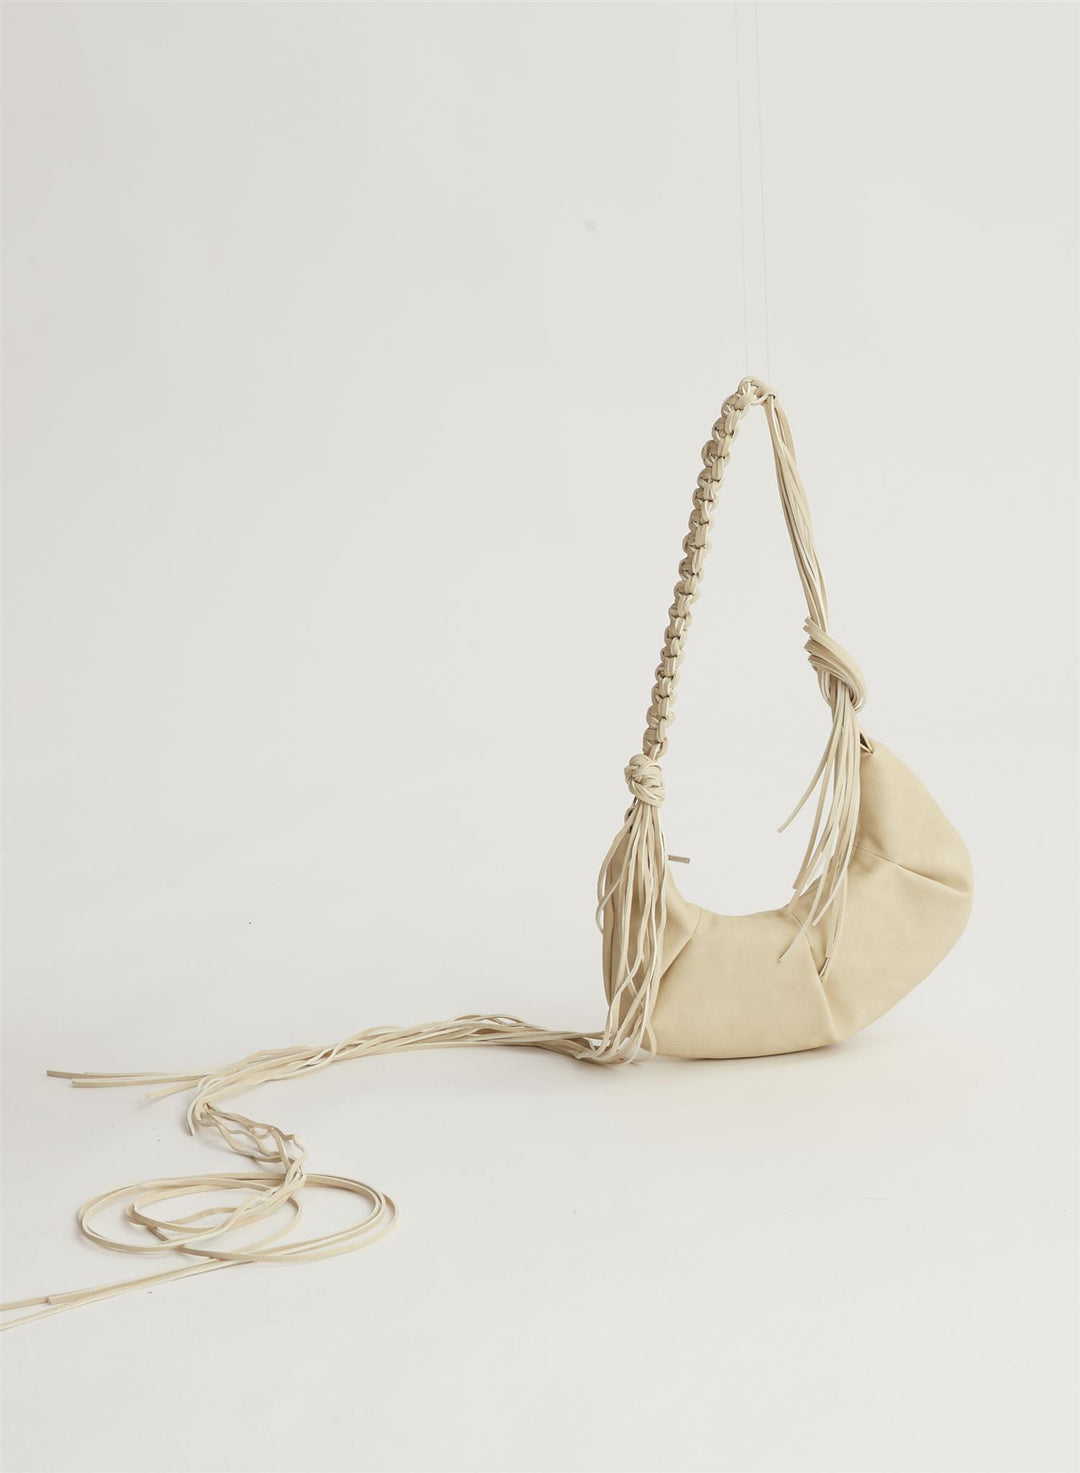 COCOON SMALL BAG